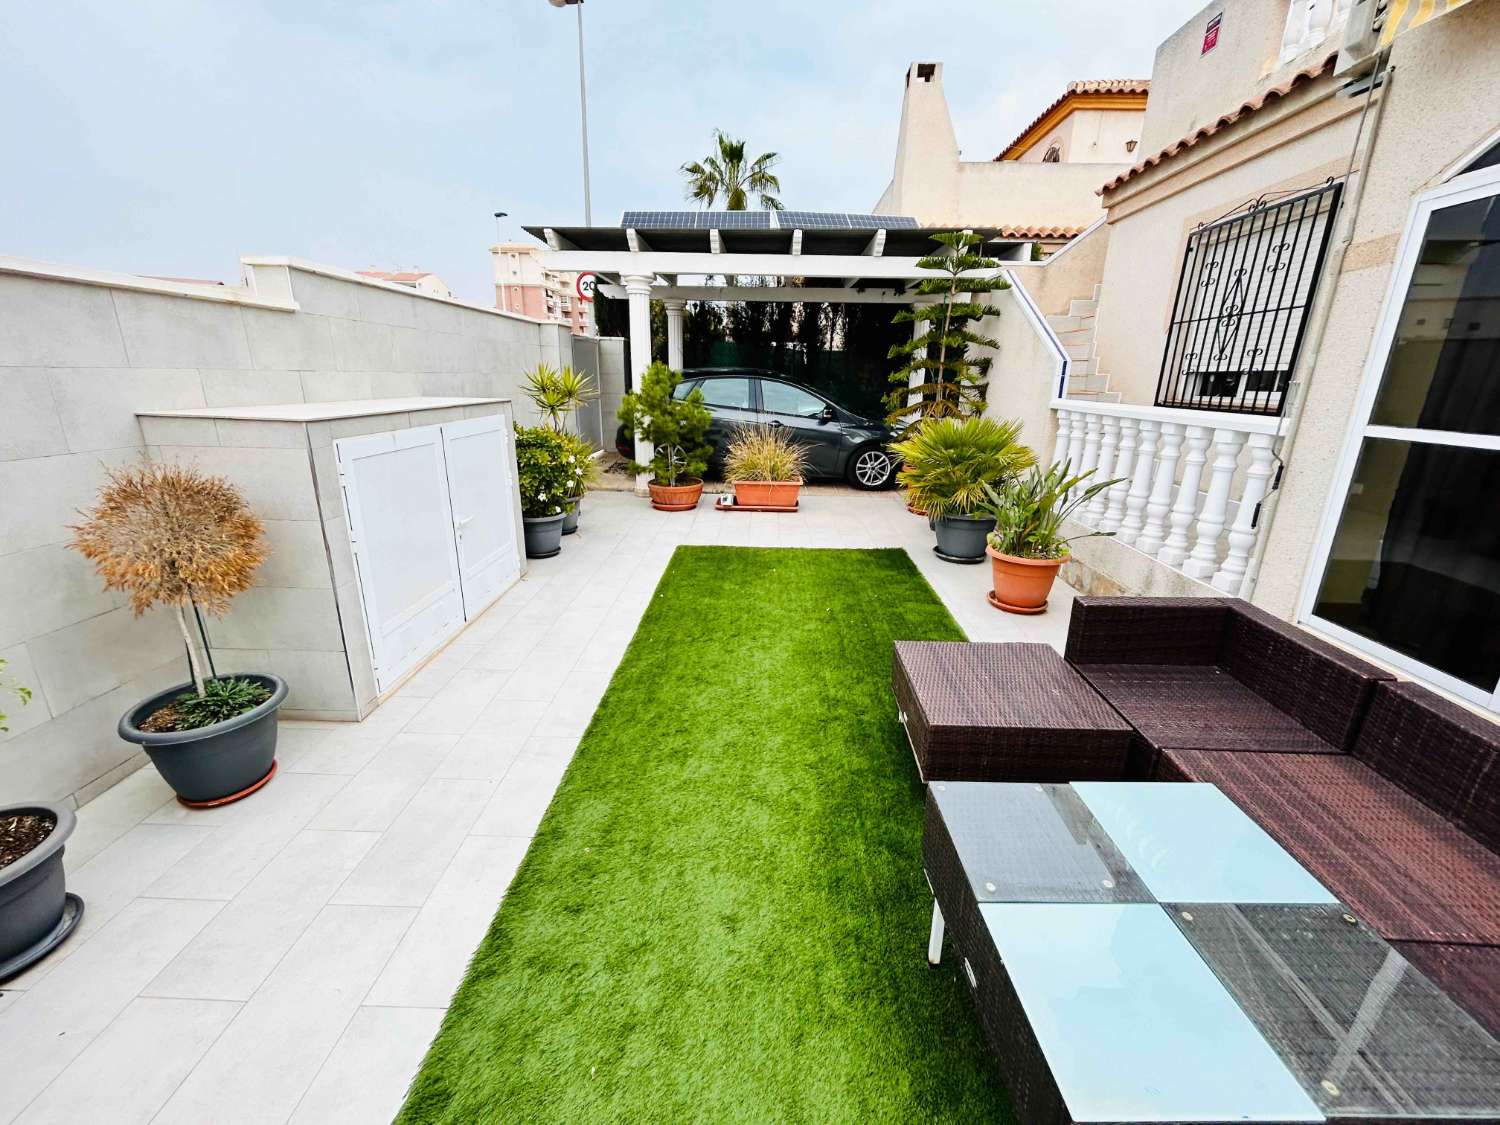 WONDERFUL SEMI-DETACHED HOUSE WITH TERRACE, SOLARIUM AND PRIVATE PARKING NEAR THE BEACH